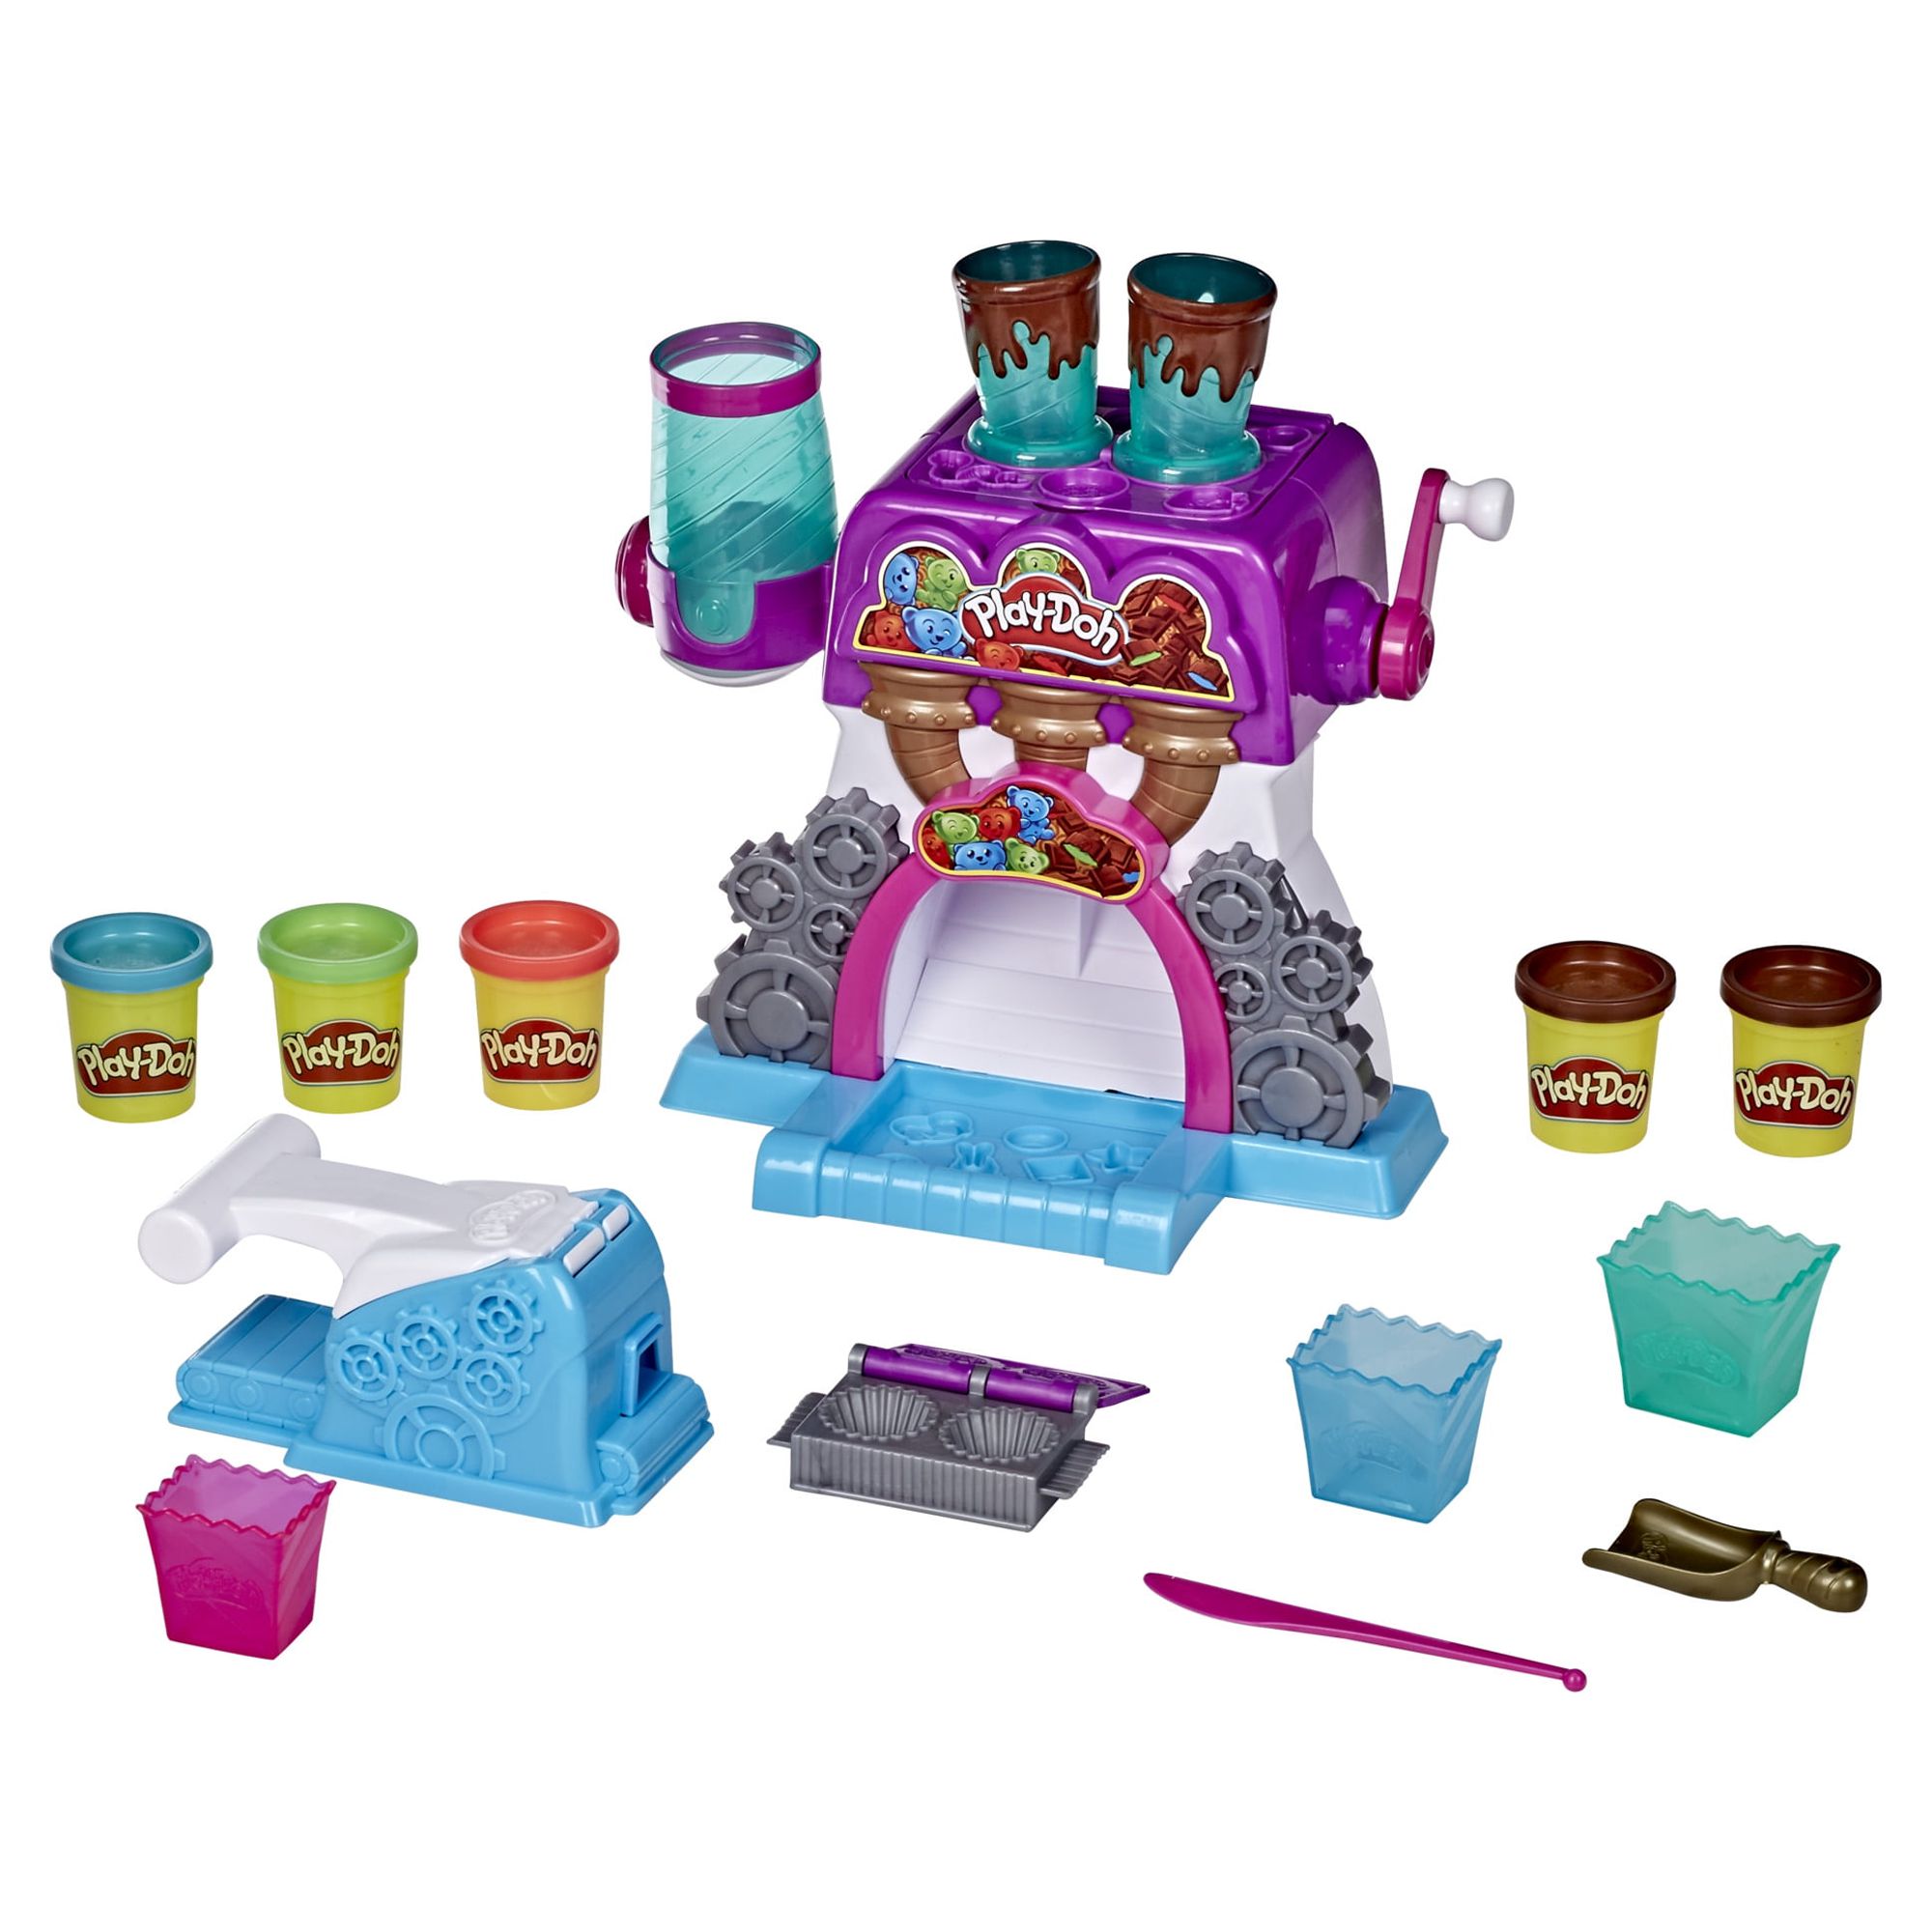 Play-Doh Kitchen Creations Candy Delight Play Dough Set - 5 Color (5 Piece) - image 1 of 11